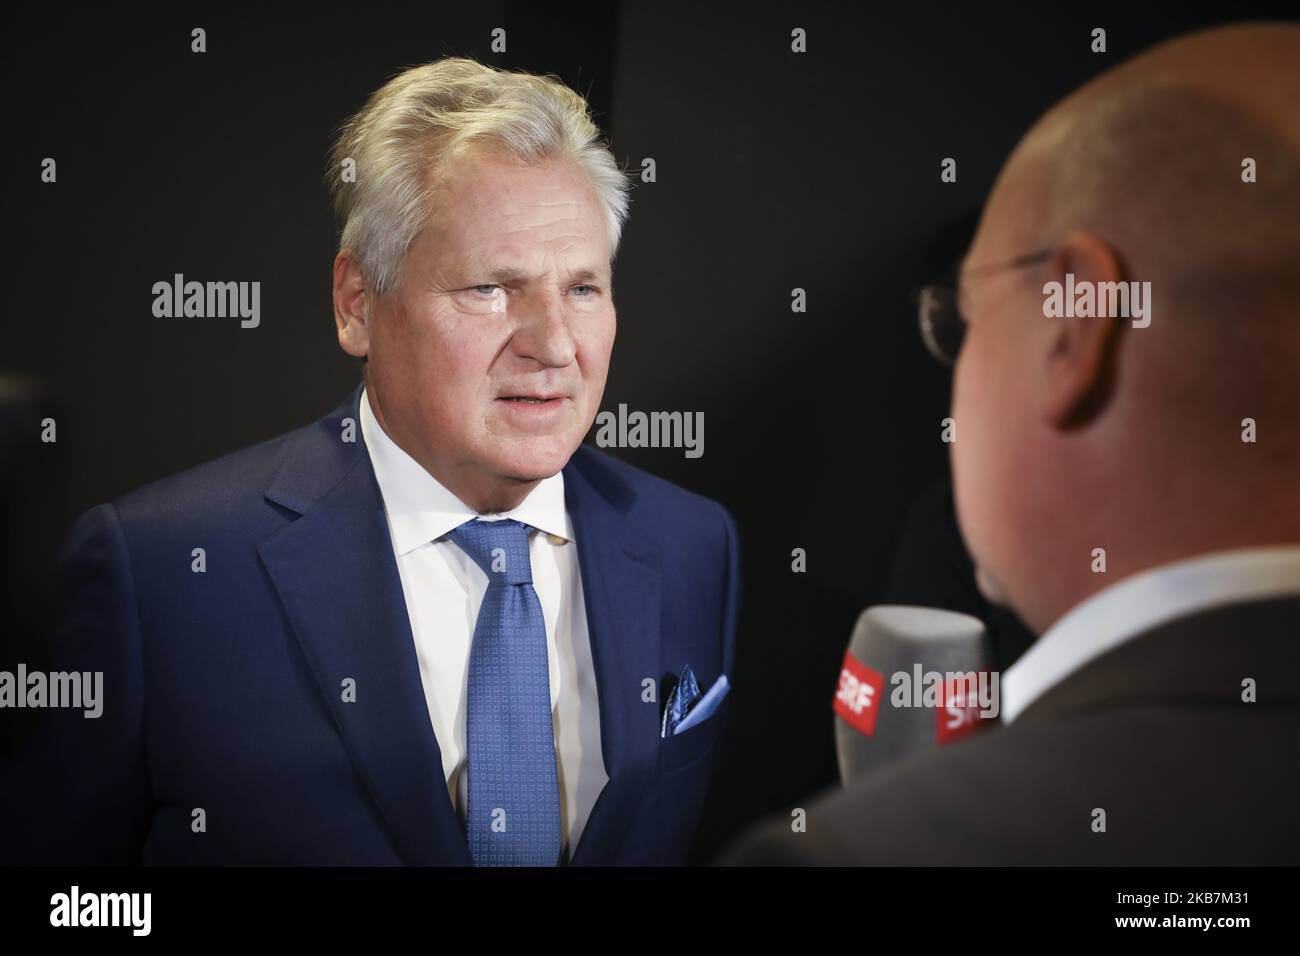 Aleksander Kwasniewski, a former President of Poland, gives an interviewto SRF journalist after The Left party campaign convention in Katowice, Poland on October 5, 2019. (Photo by Beata Zawrzel/NurPhoto) Stock Photo